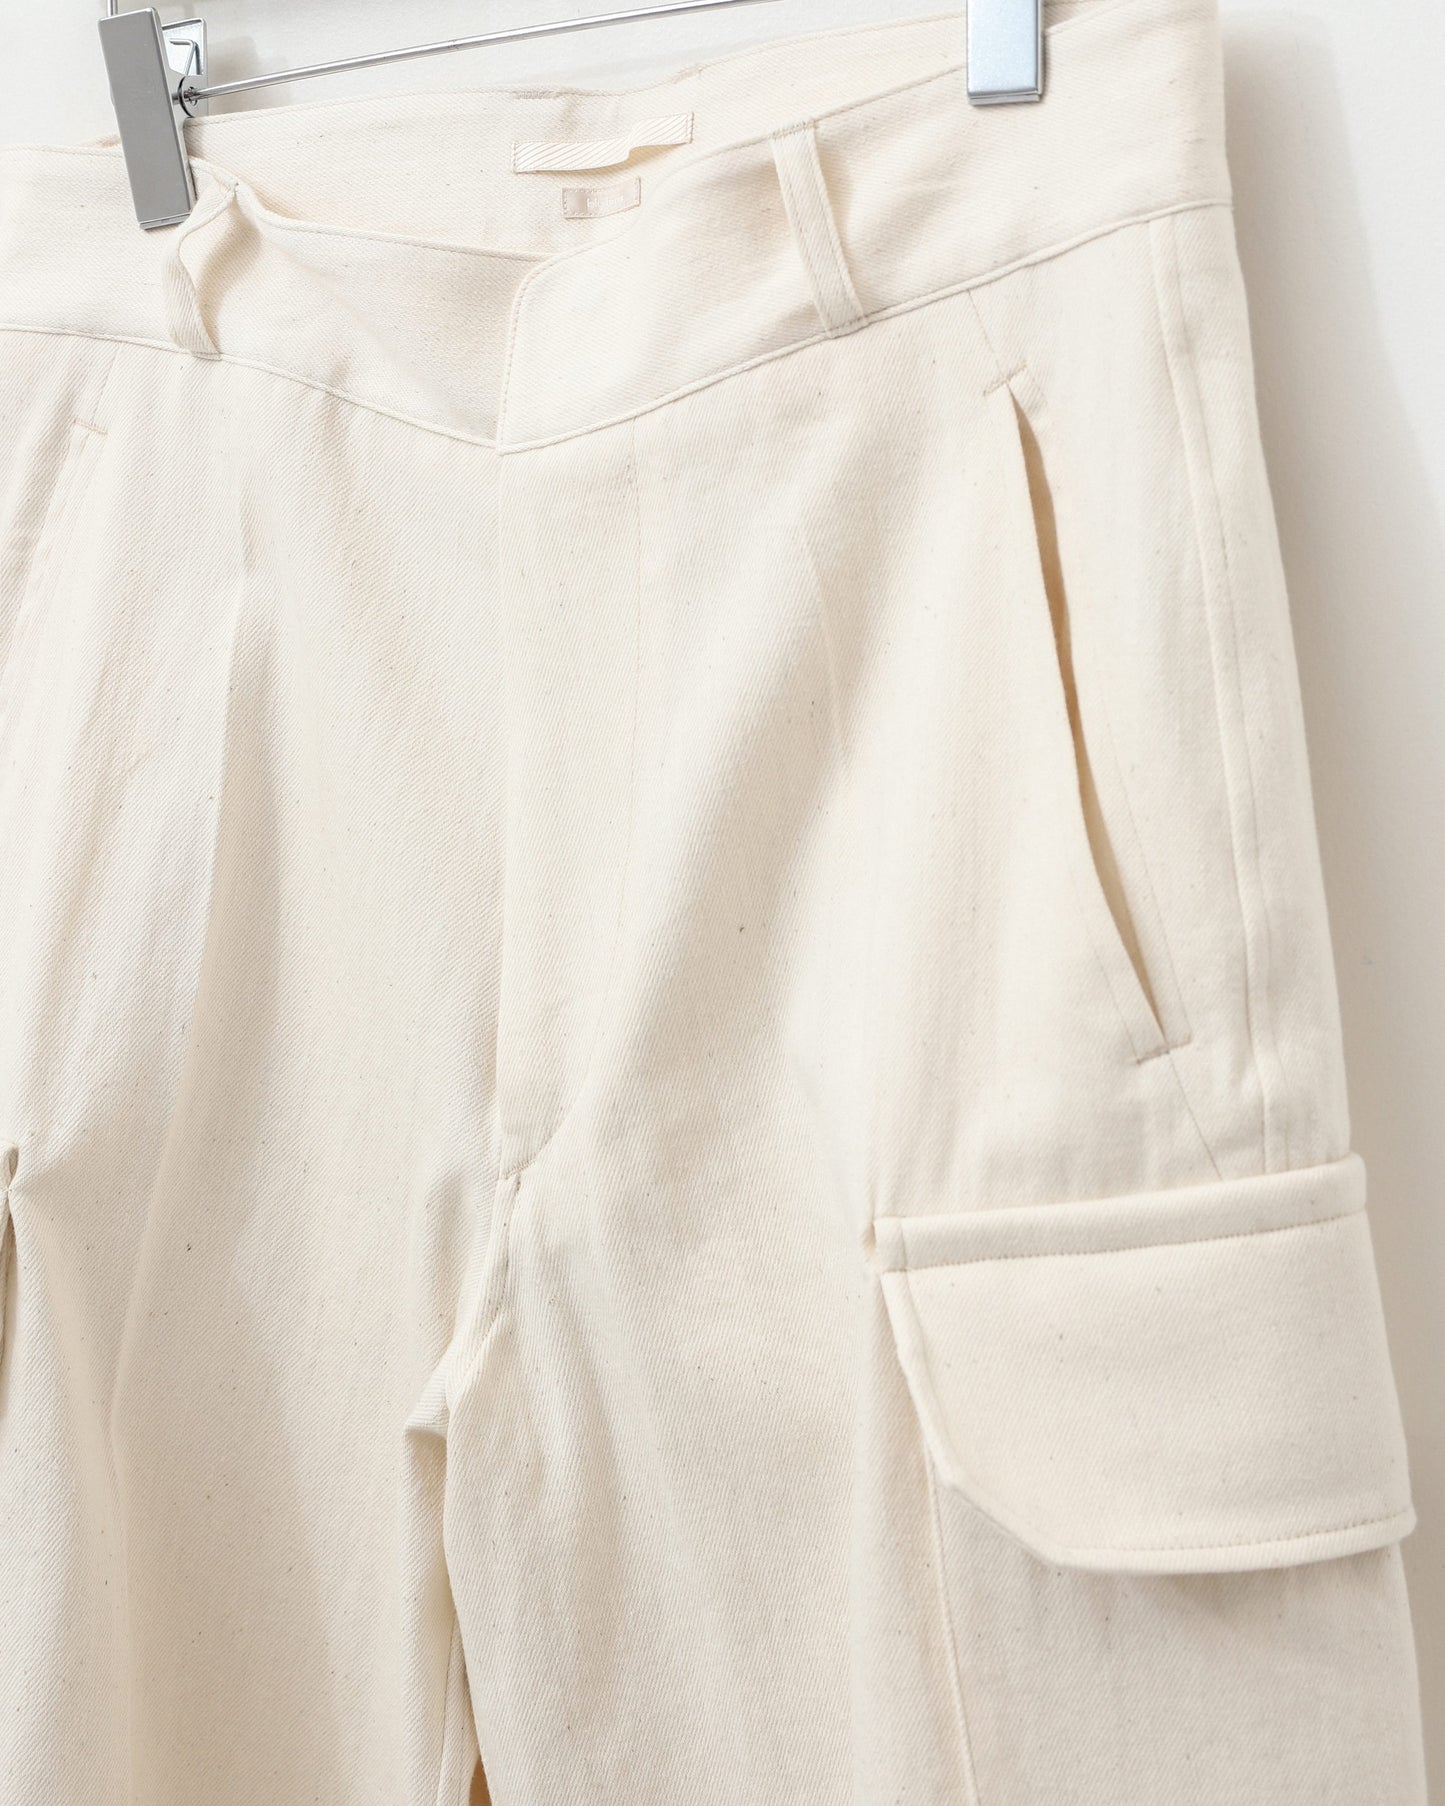 Twill French Combet Trousers Ivory